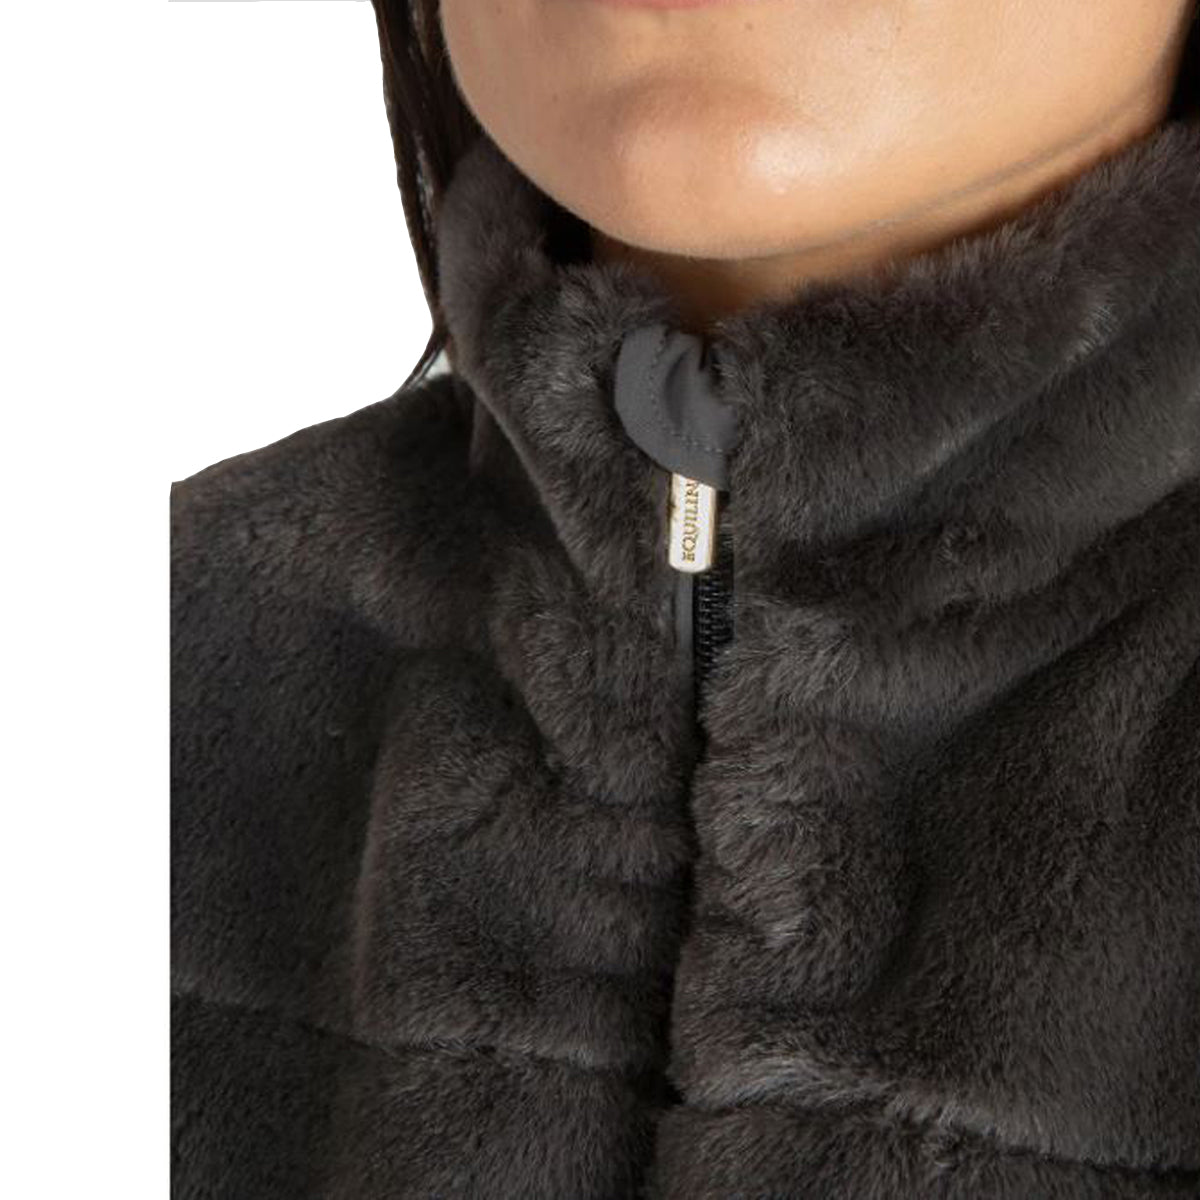  Save The Duck Women's Fury Reversible Faux Fur Hooded